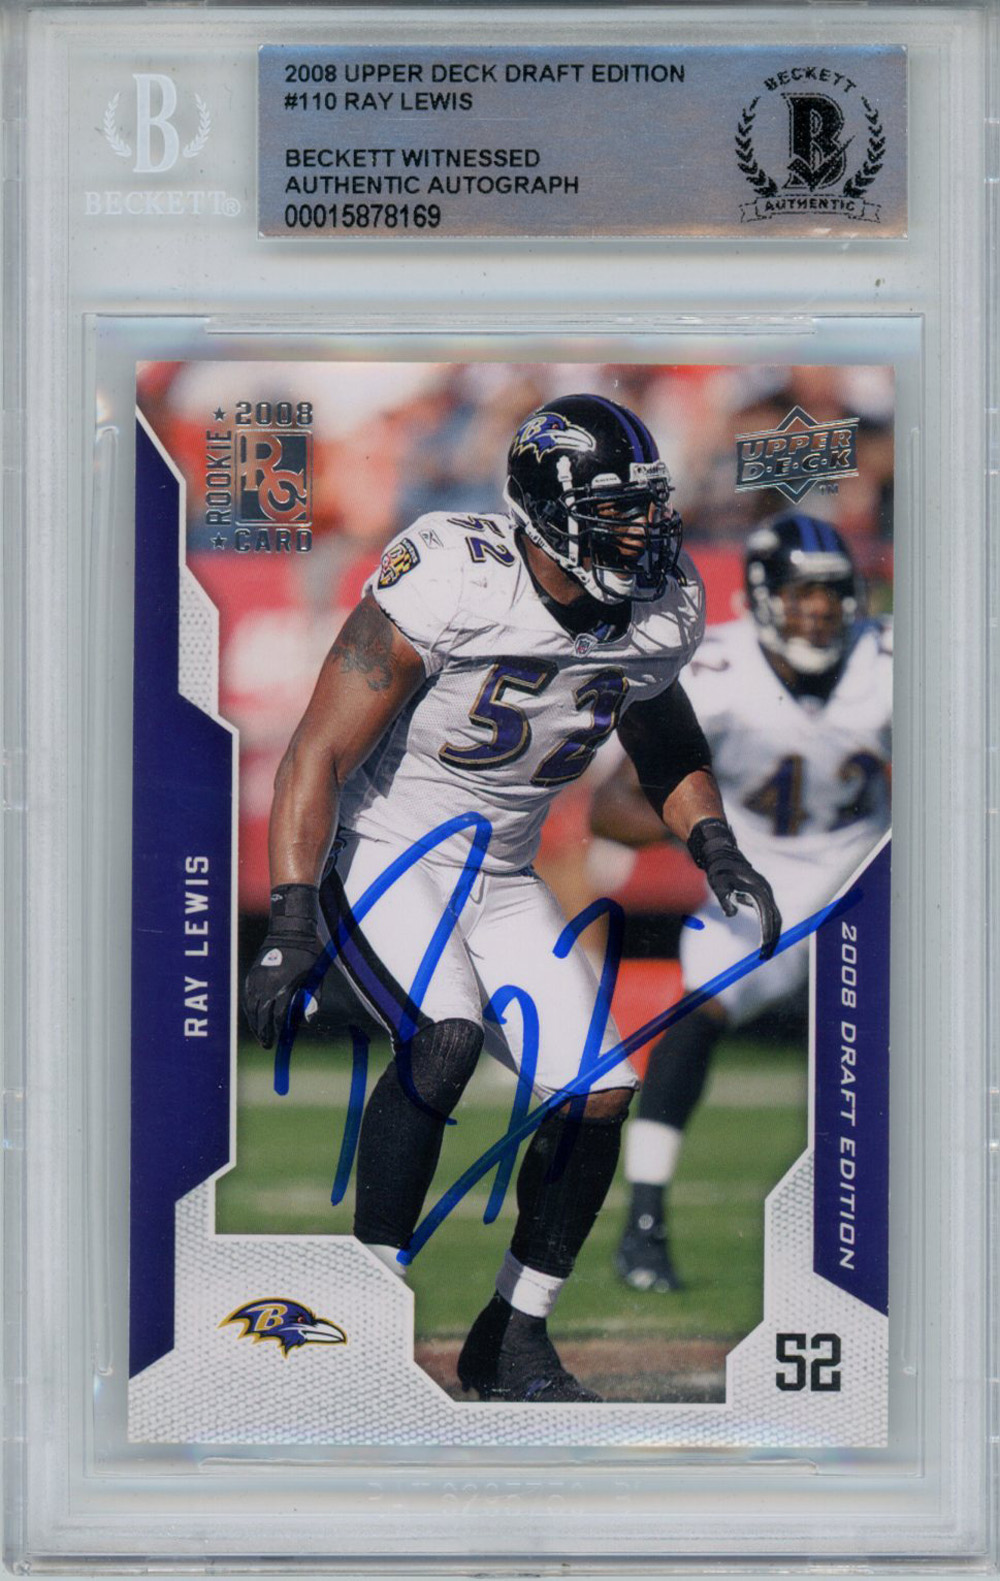 Ray Lewis Signed 2008 Upper Deck Draft Edition #110 Trading Card BAS Slab